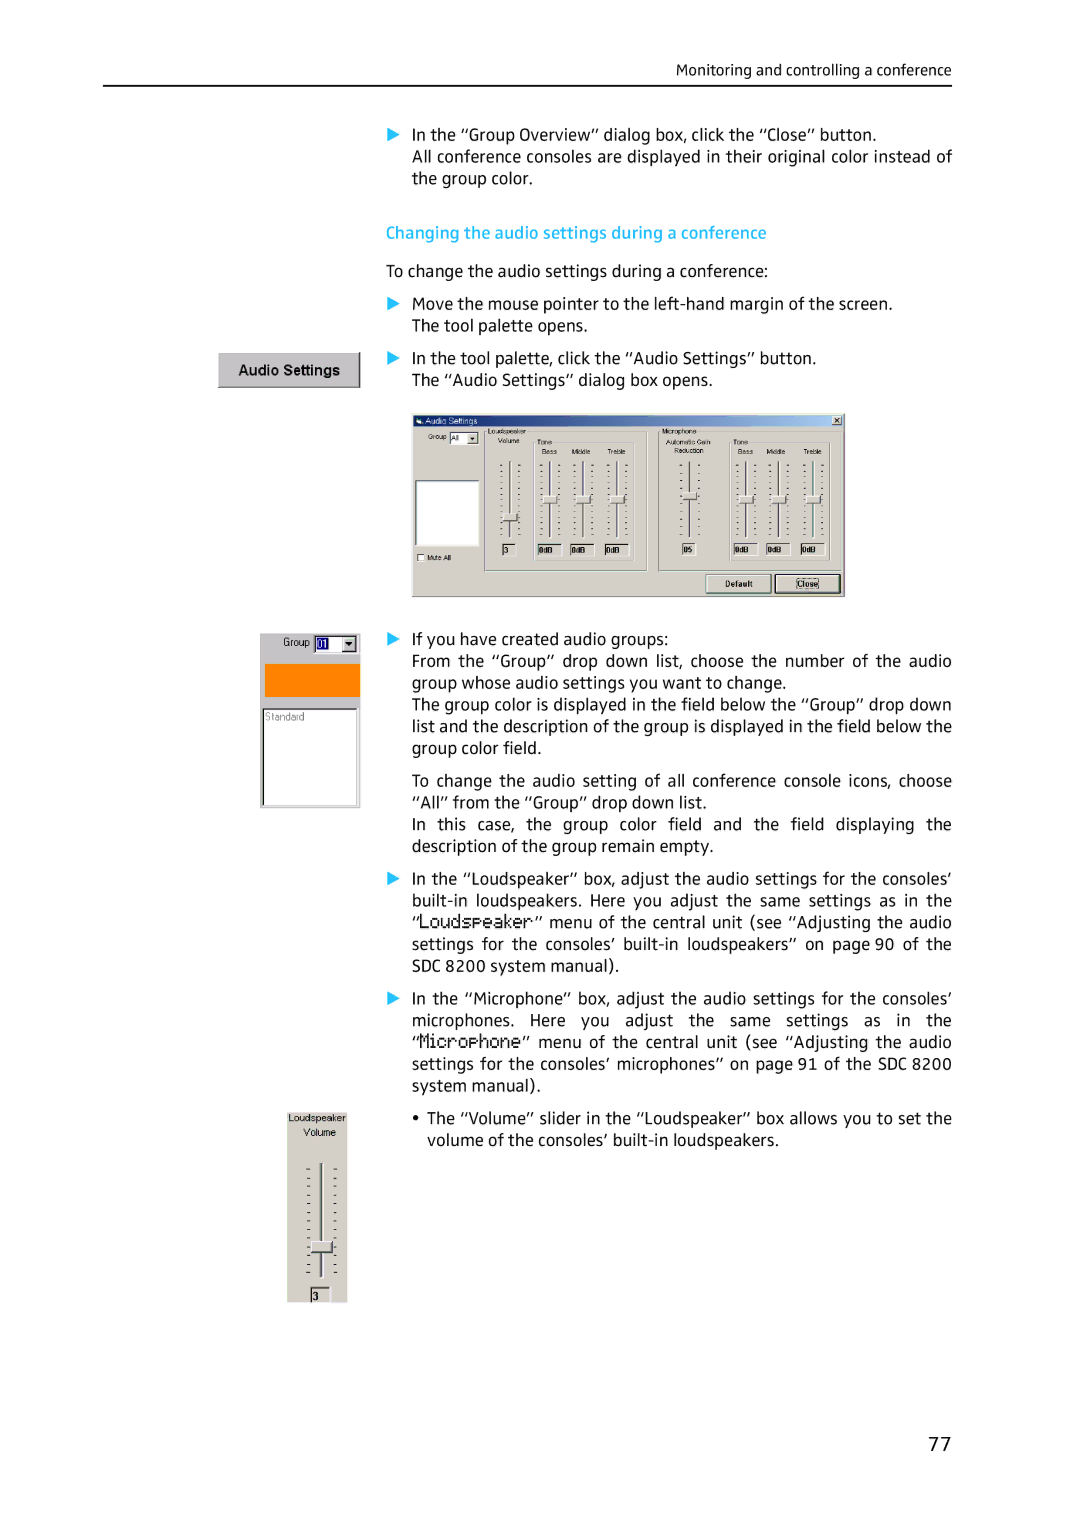 Sennheiser SDC 8200 SYS-M software manual Changing the audio settings during a conference 